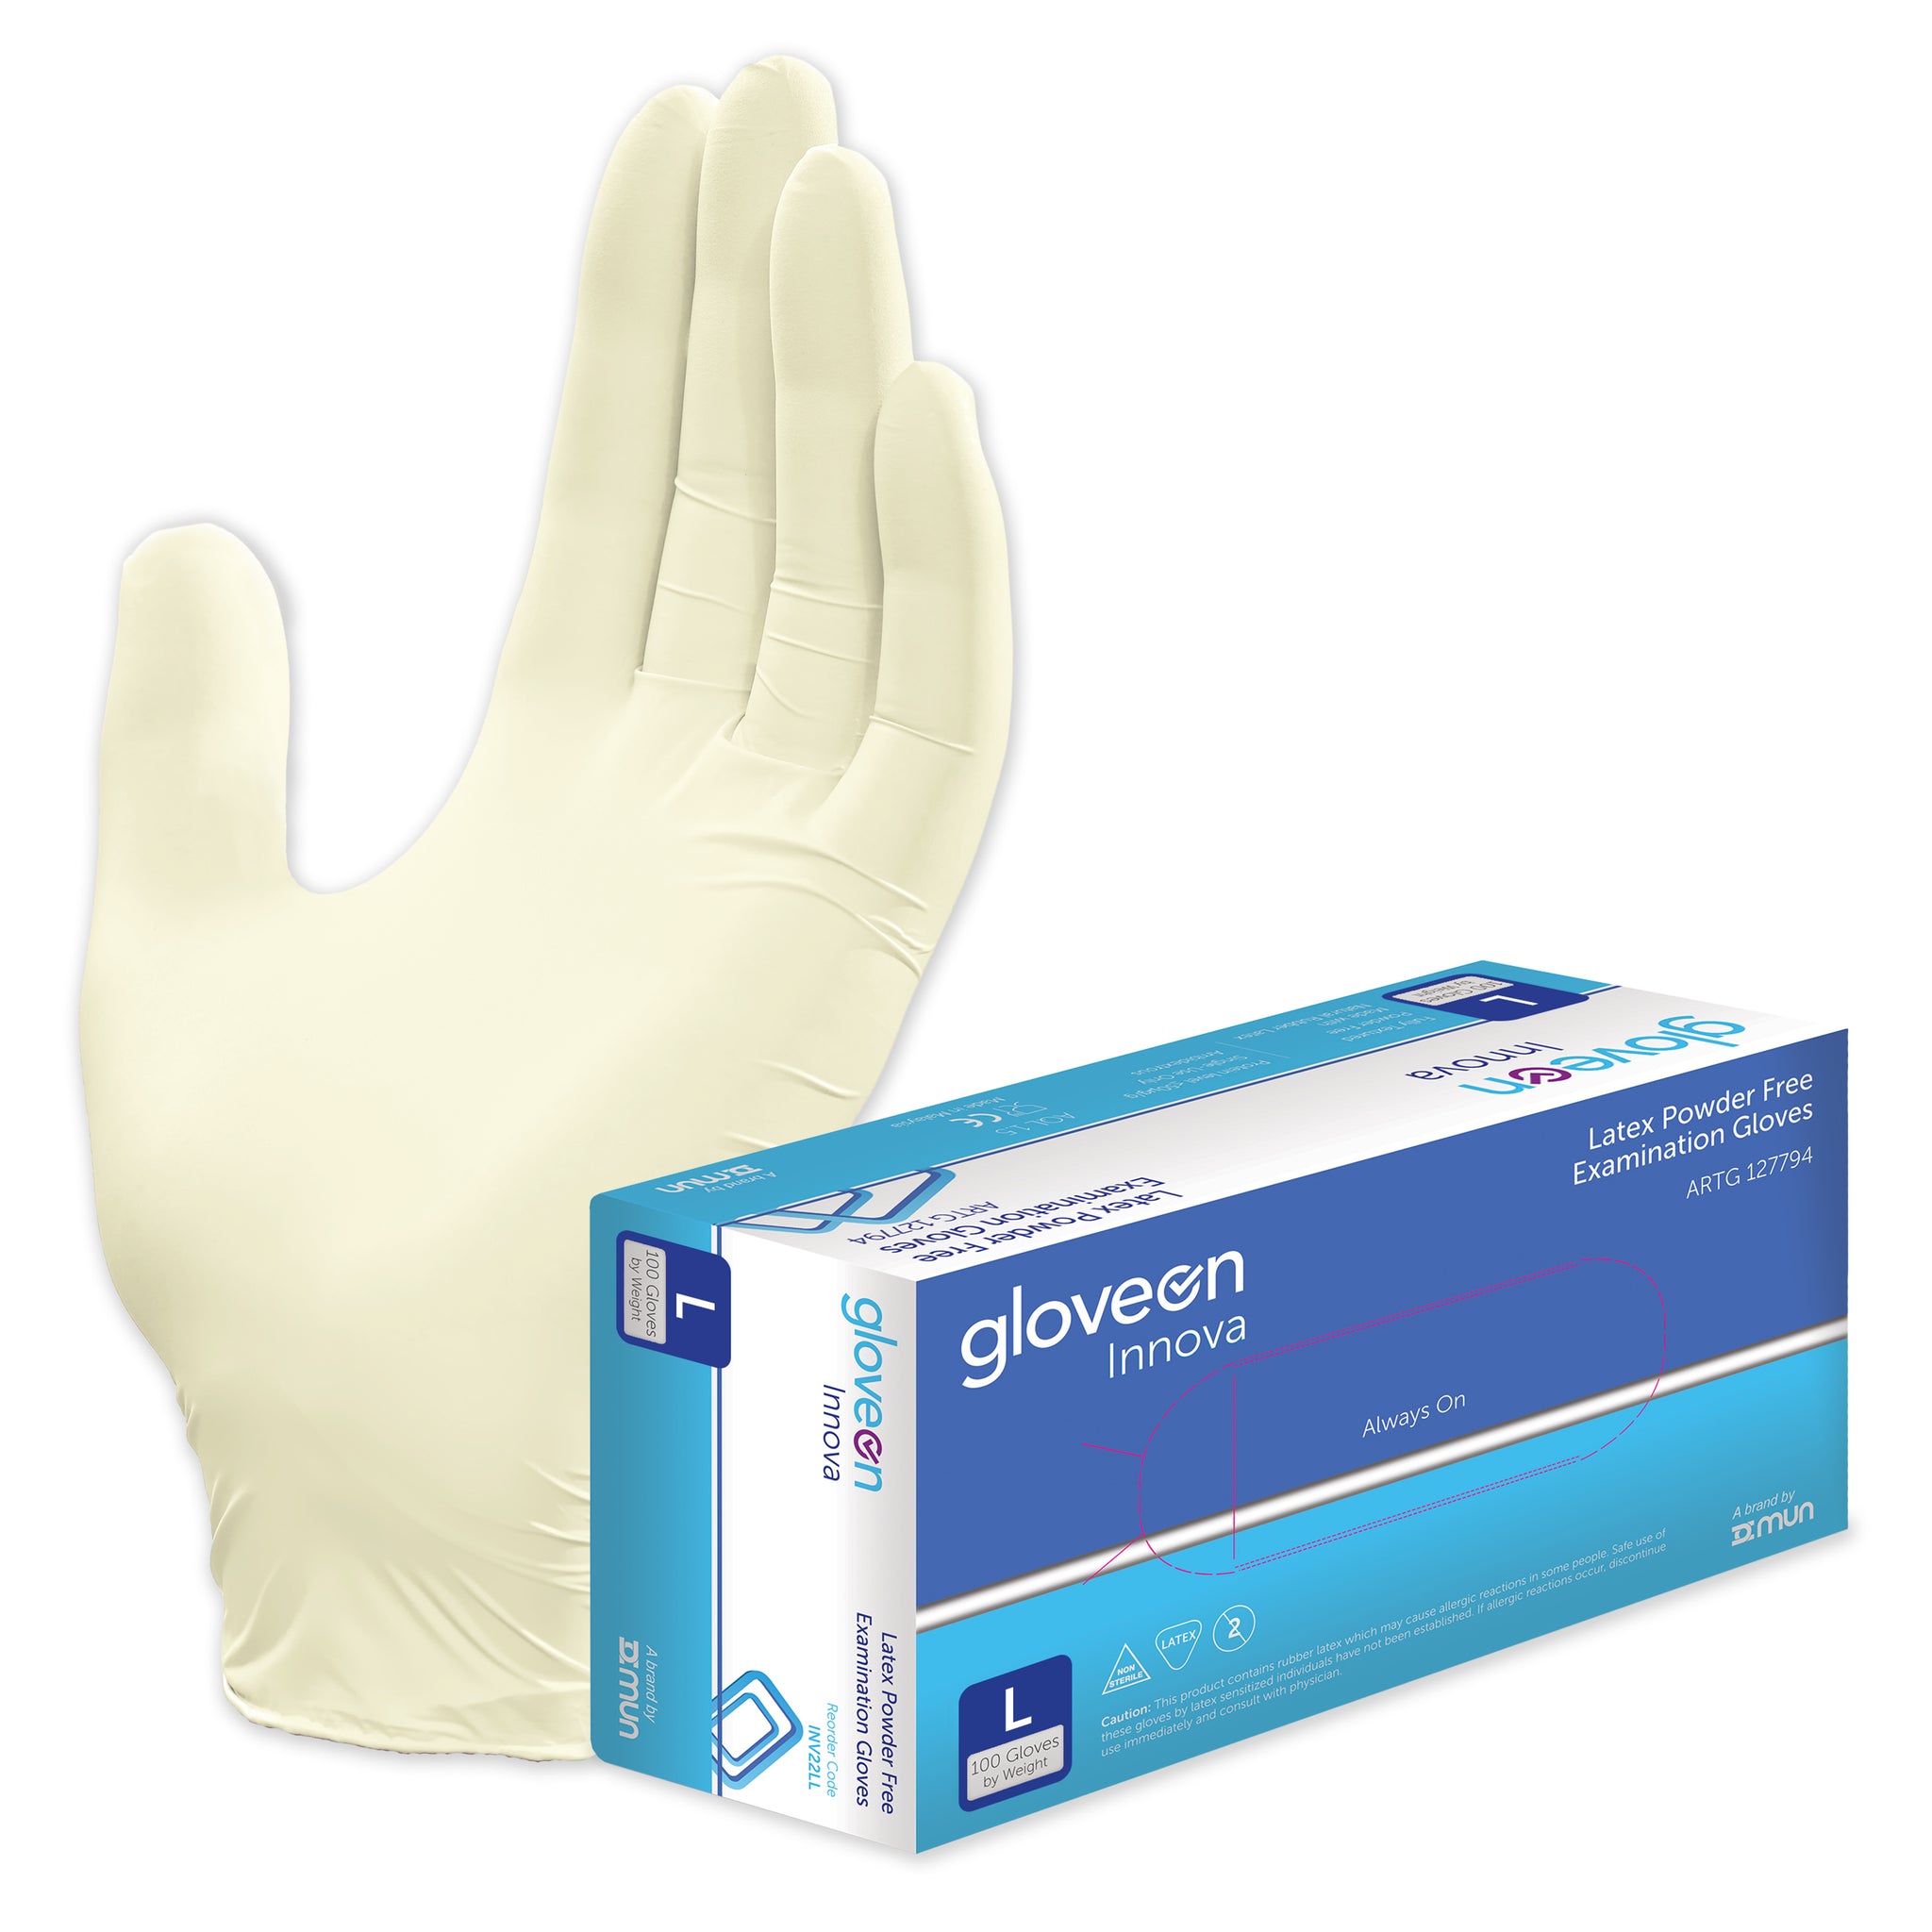 Exam Gloves, Powder Free, Non-Sterile, Fully Textured, Standard Cuff, Natural Colour - Box of 100, L